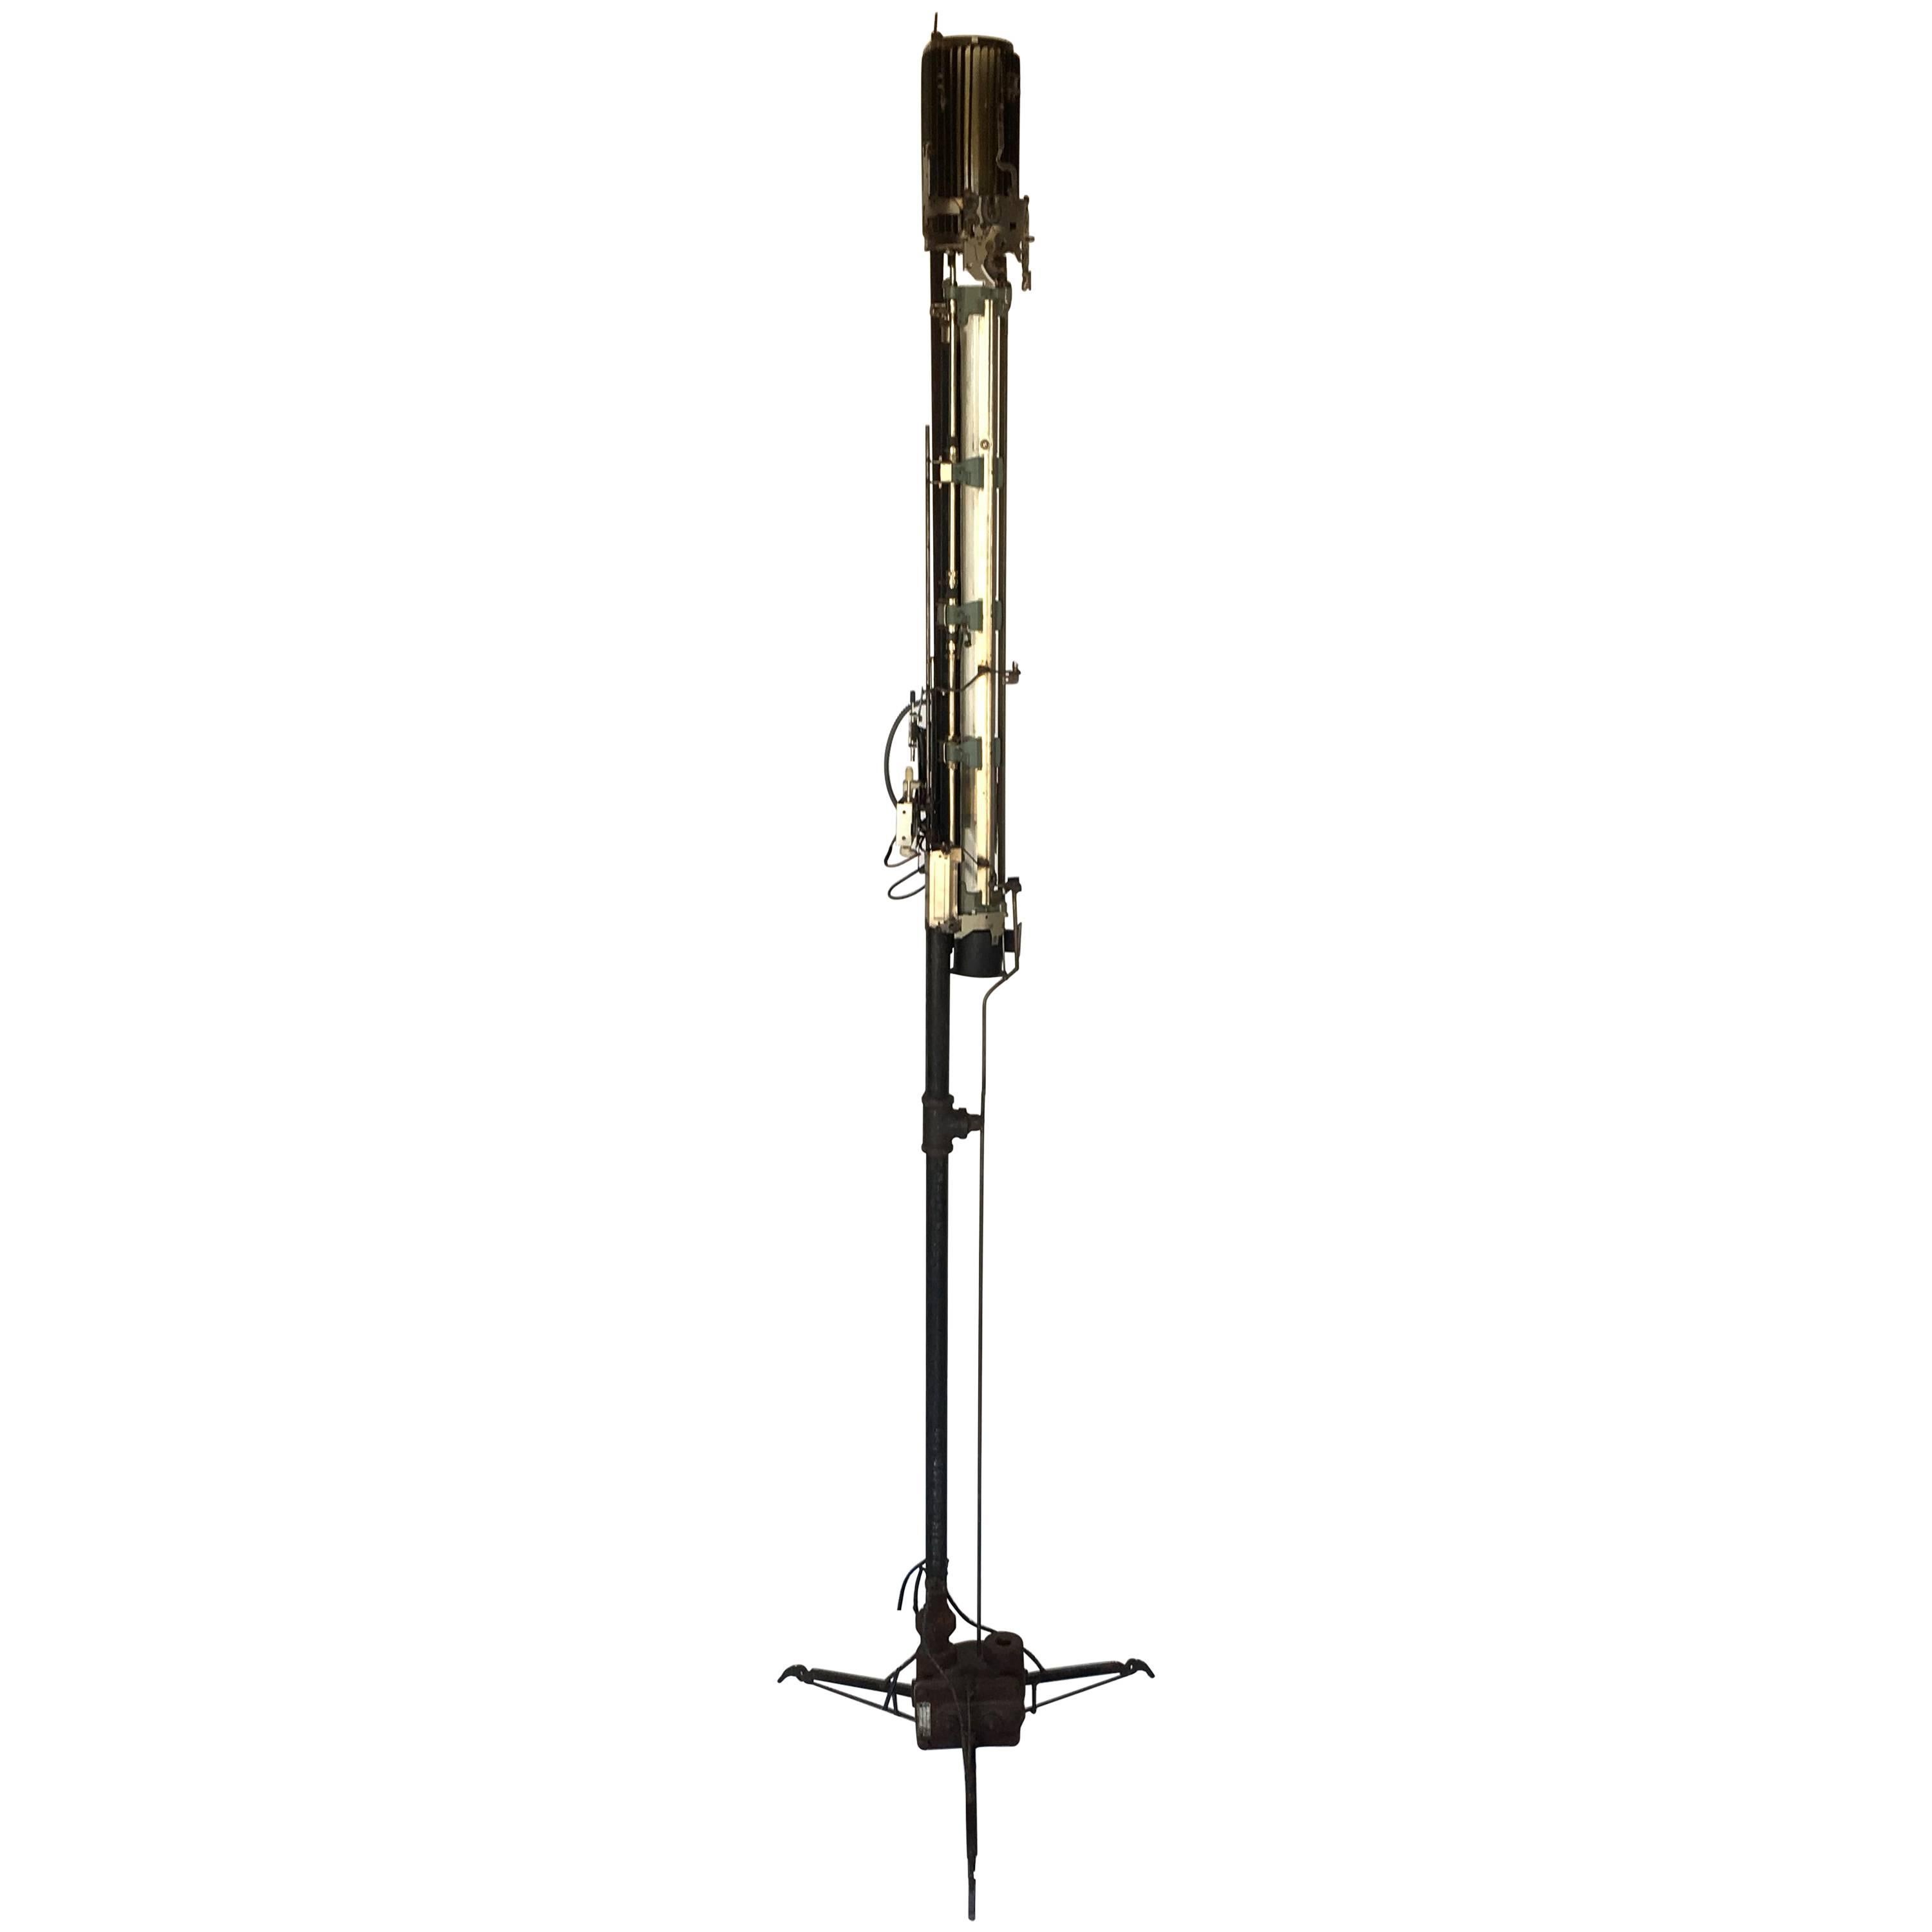 Mechanical Assemblage "Star Wars" Style Floor Lamp